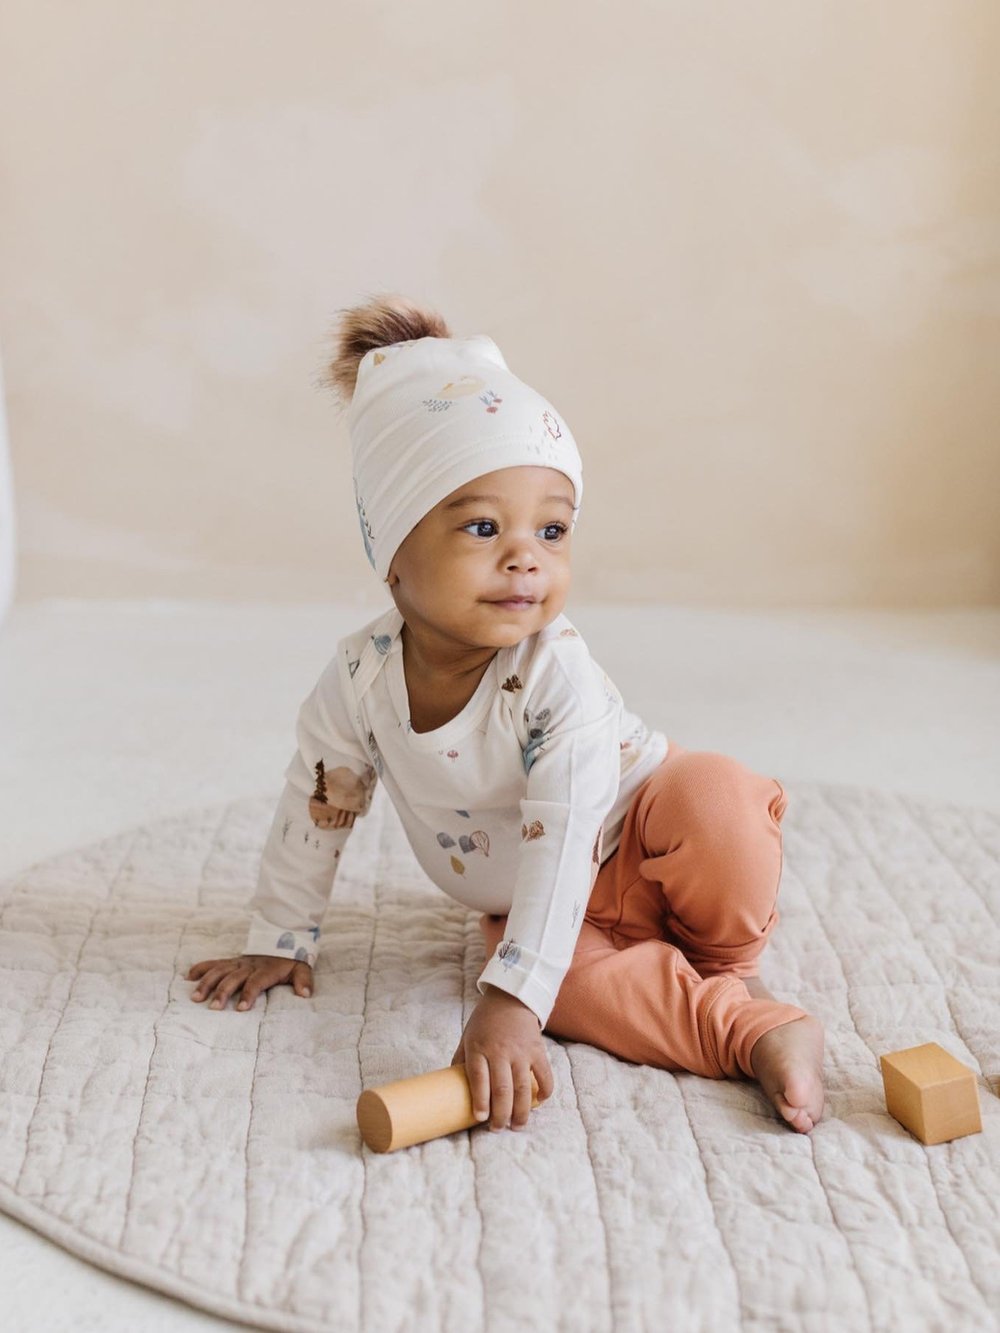 Sustainable And Eco-Friendly Baby Clothing Options For Boys